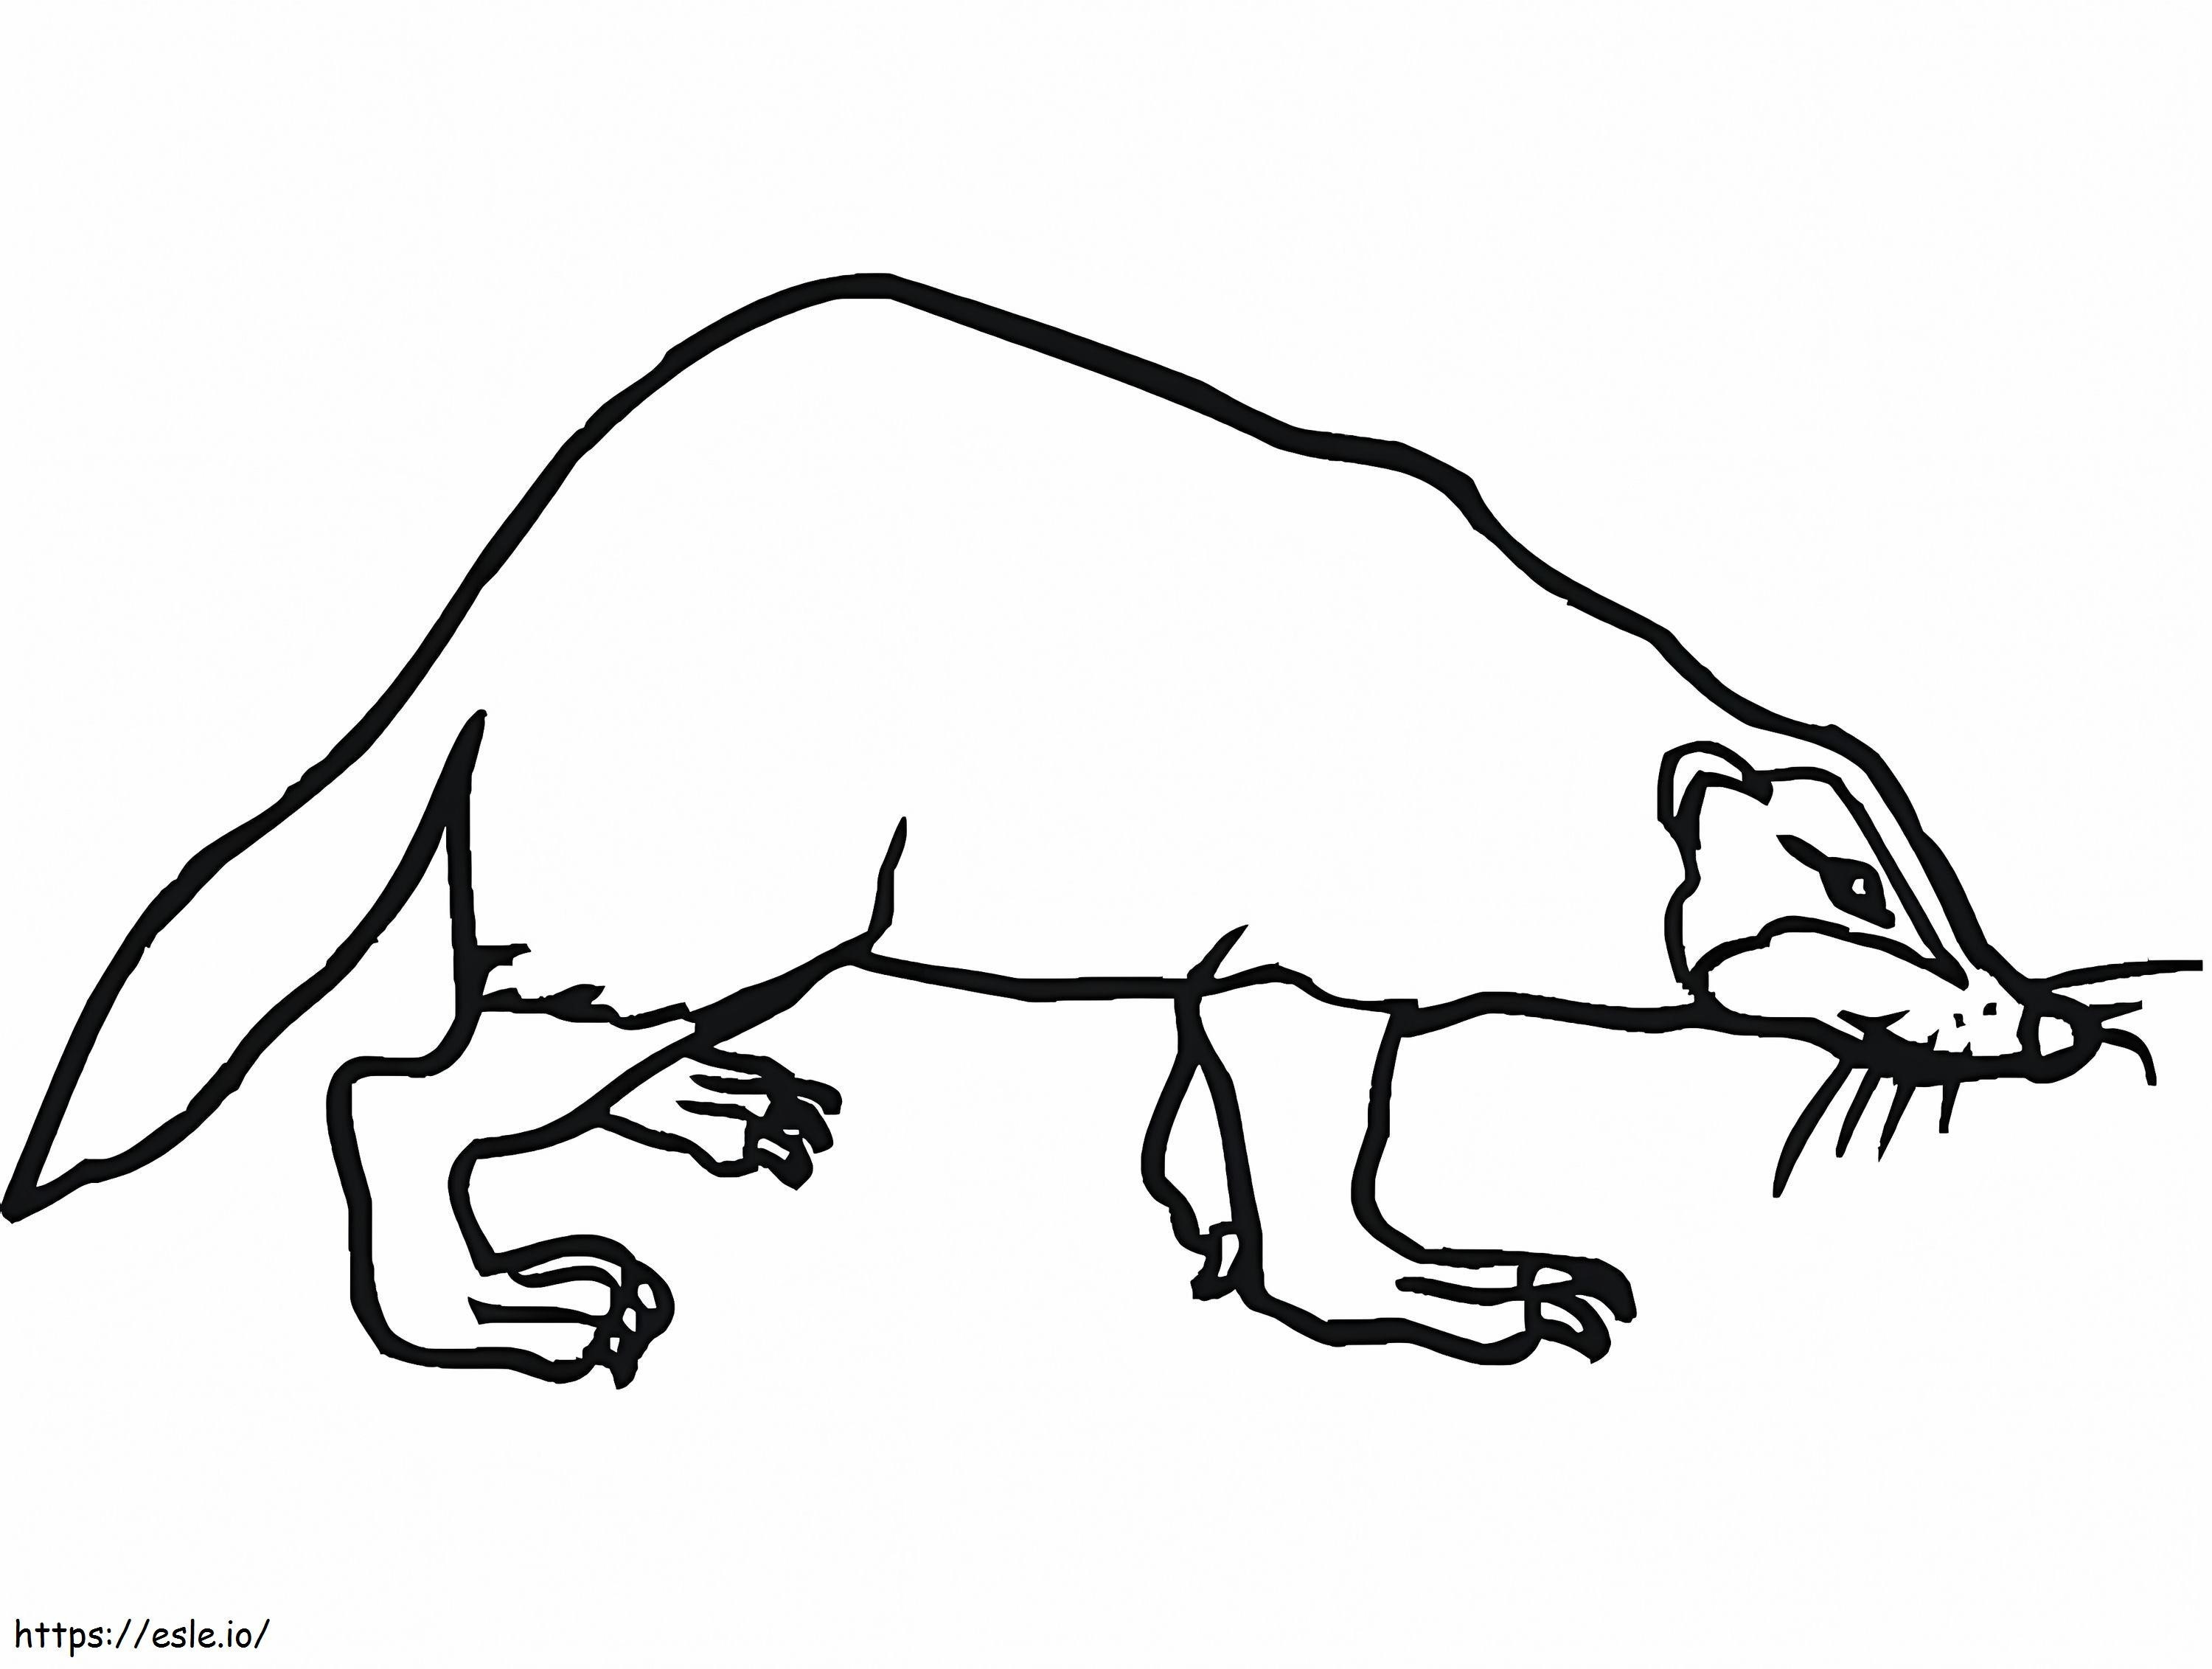 A Simple Badger coloring page